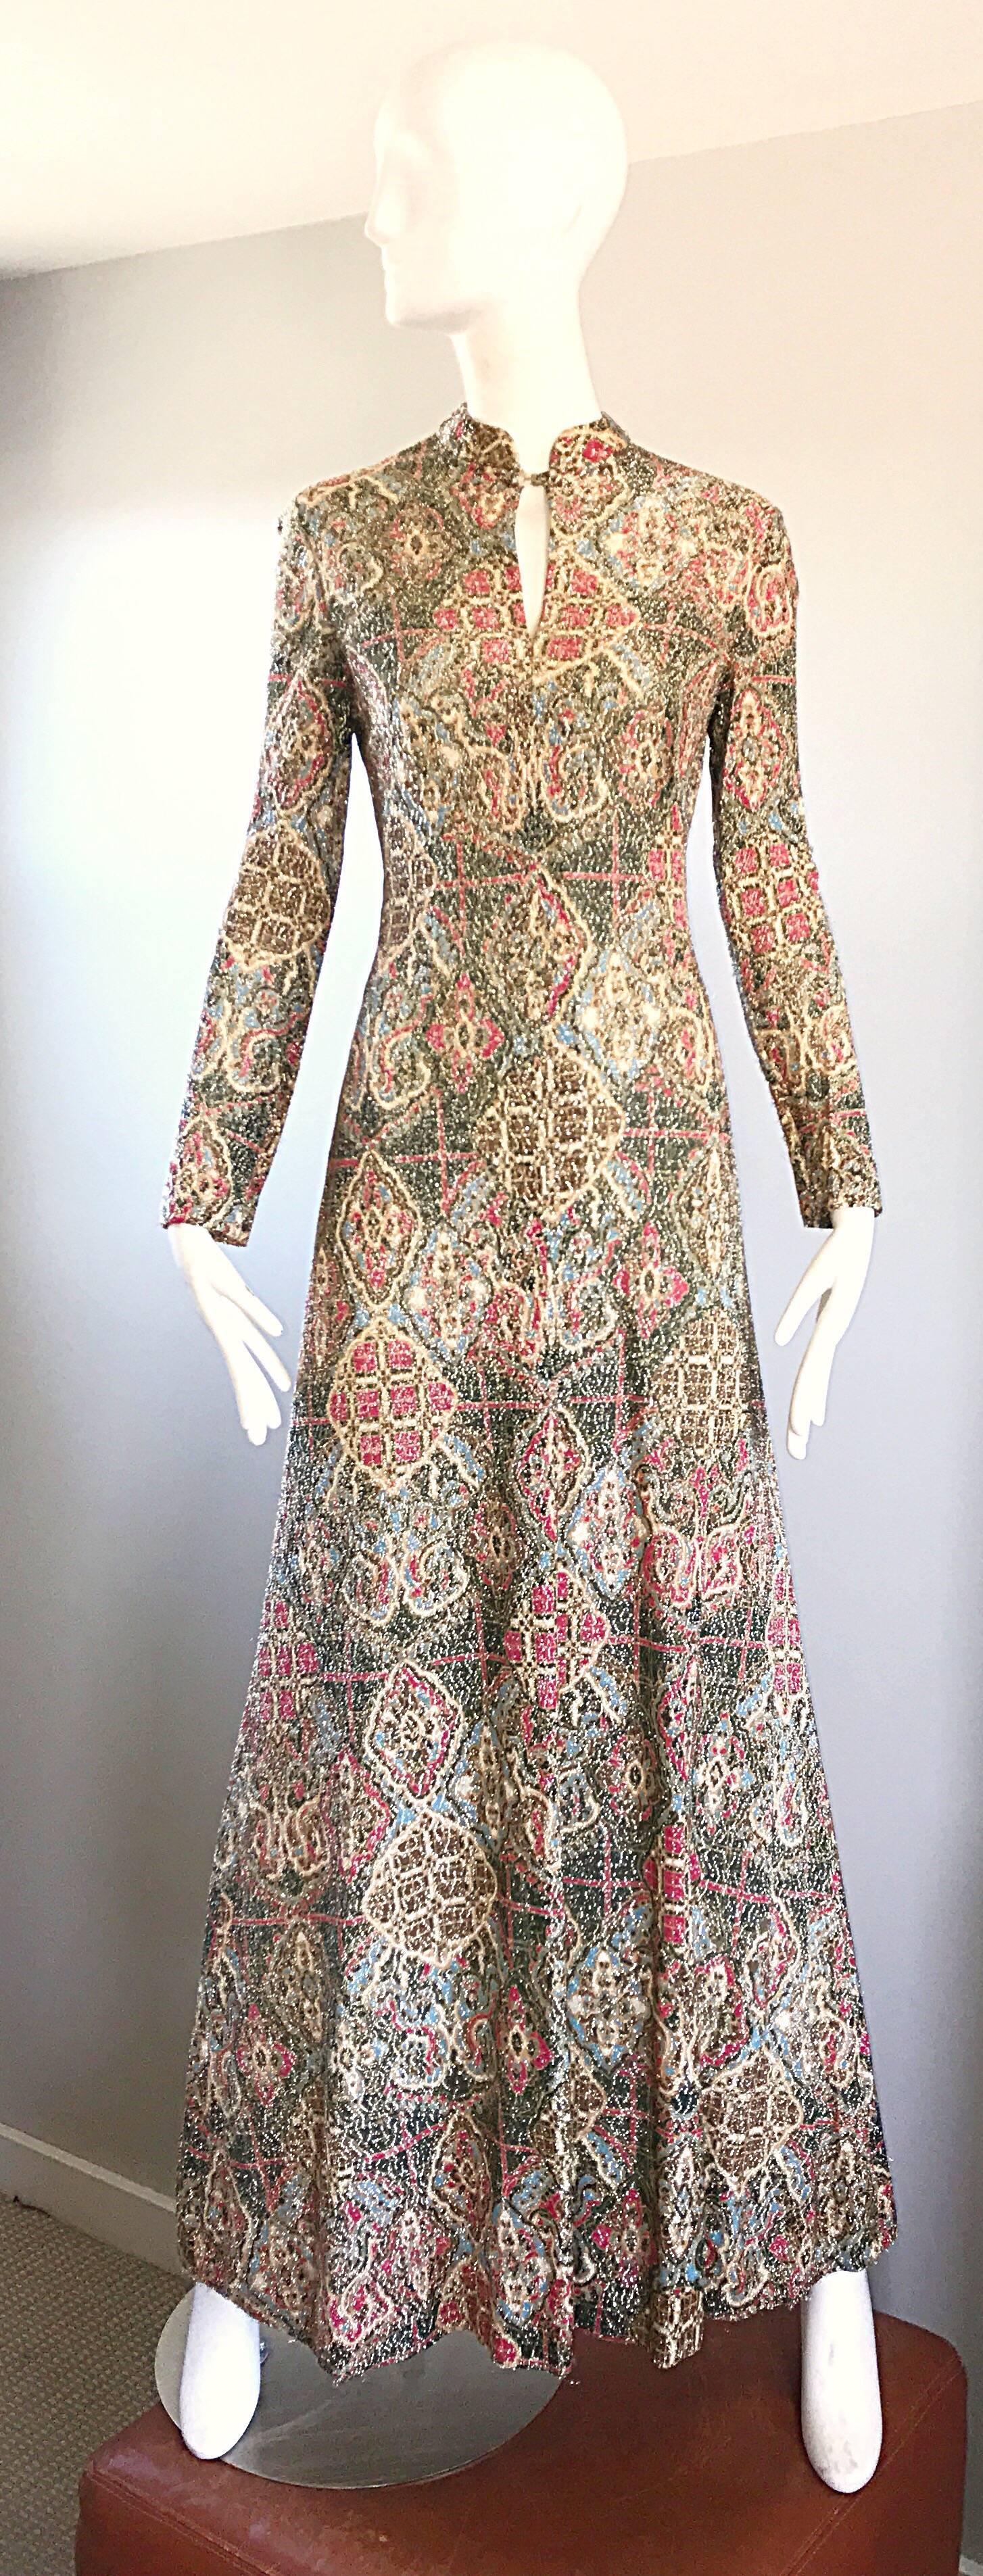 Incredible 1970s ADELE SIMPSON metallic lurex long sleeve Asian inspired gown / maxi dress! Features a unique chic Rococo Baroque / romantic batik ethnic print in warm hues of green, blue, red, brown, ivory and gold throughout. Gold lurex thread